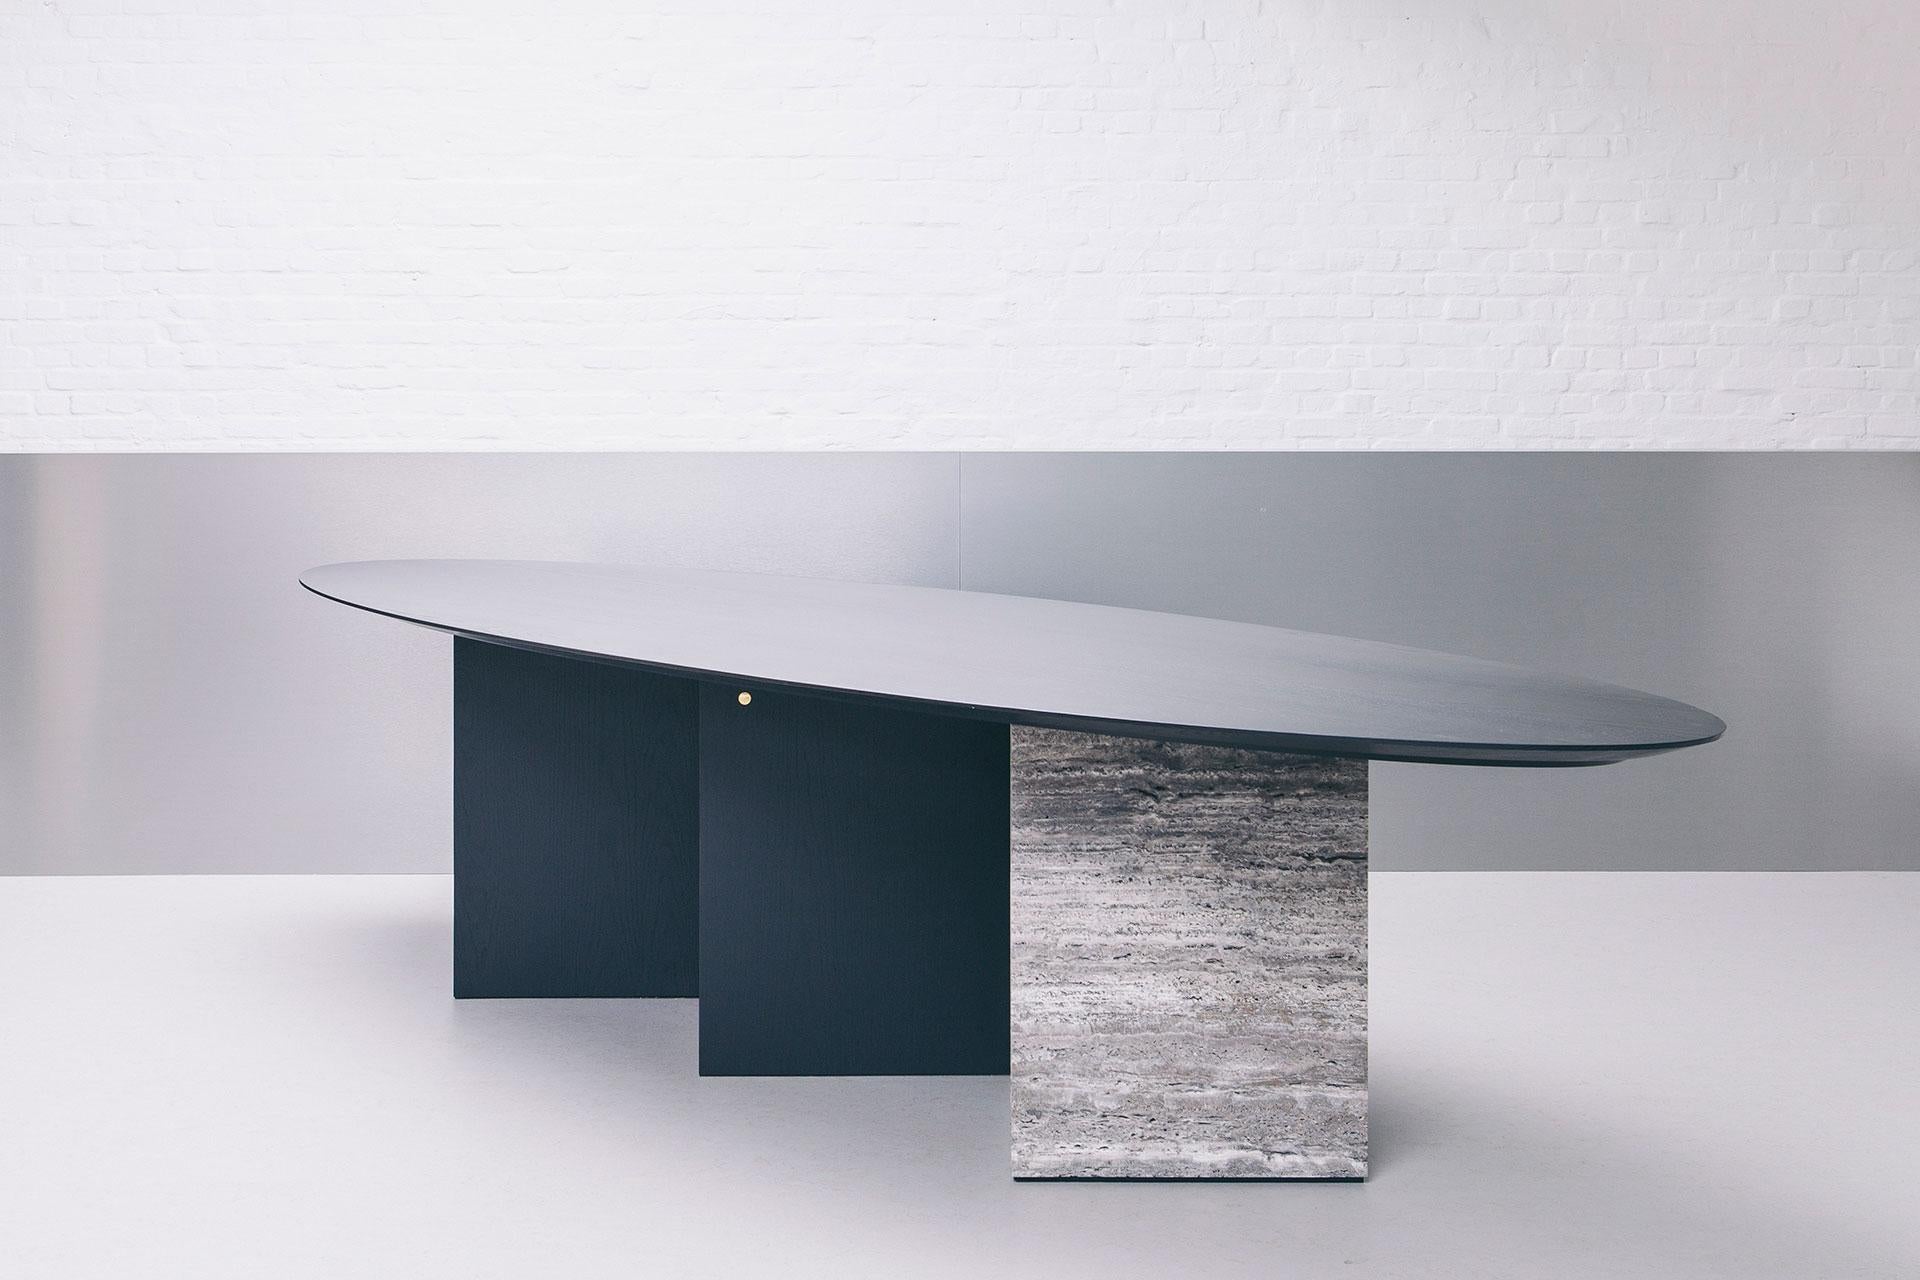 Ellipse 01.1 is a spacious elliptical table. Playful in shape, distinguished in finishing and choice of materials. It is not only its size and social form that makes this piece of furniture Stand out. What makes it truly unique is the characterful